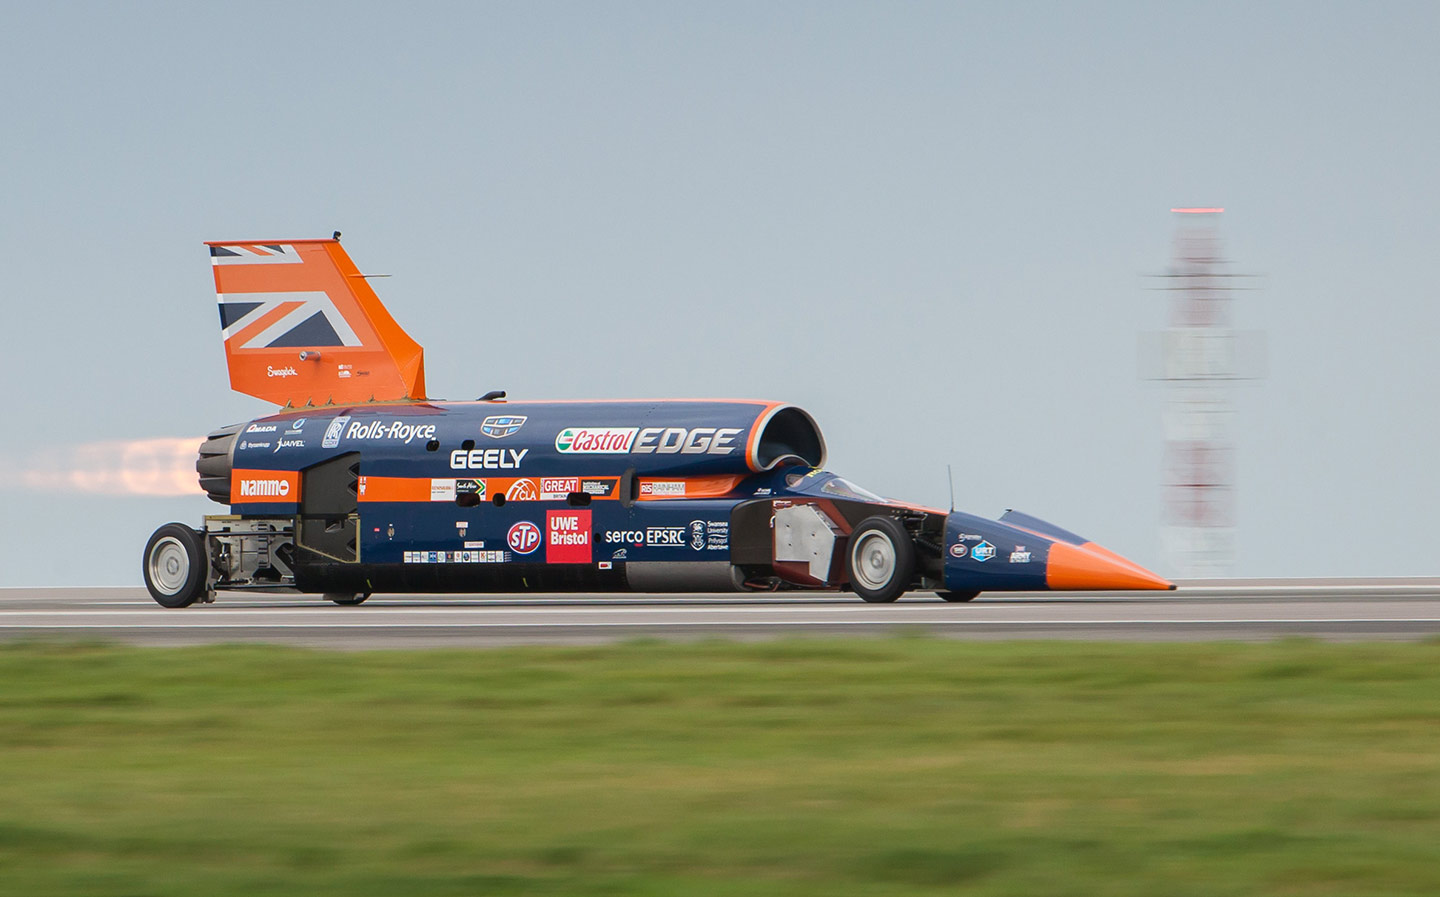 From 0 to 200mph in 7sec: Bloodhound land speed record car's first jet-powered run